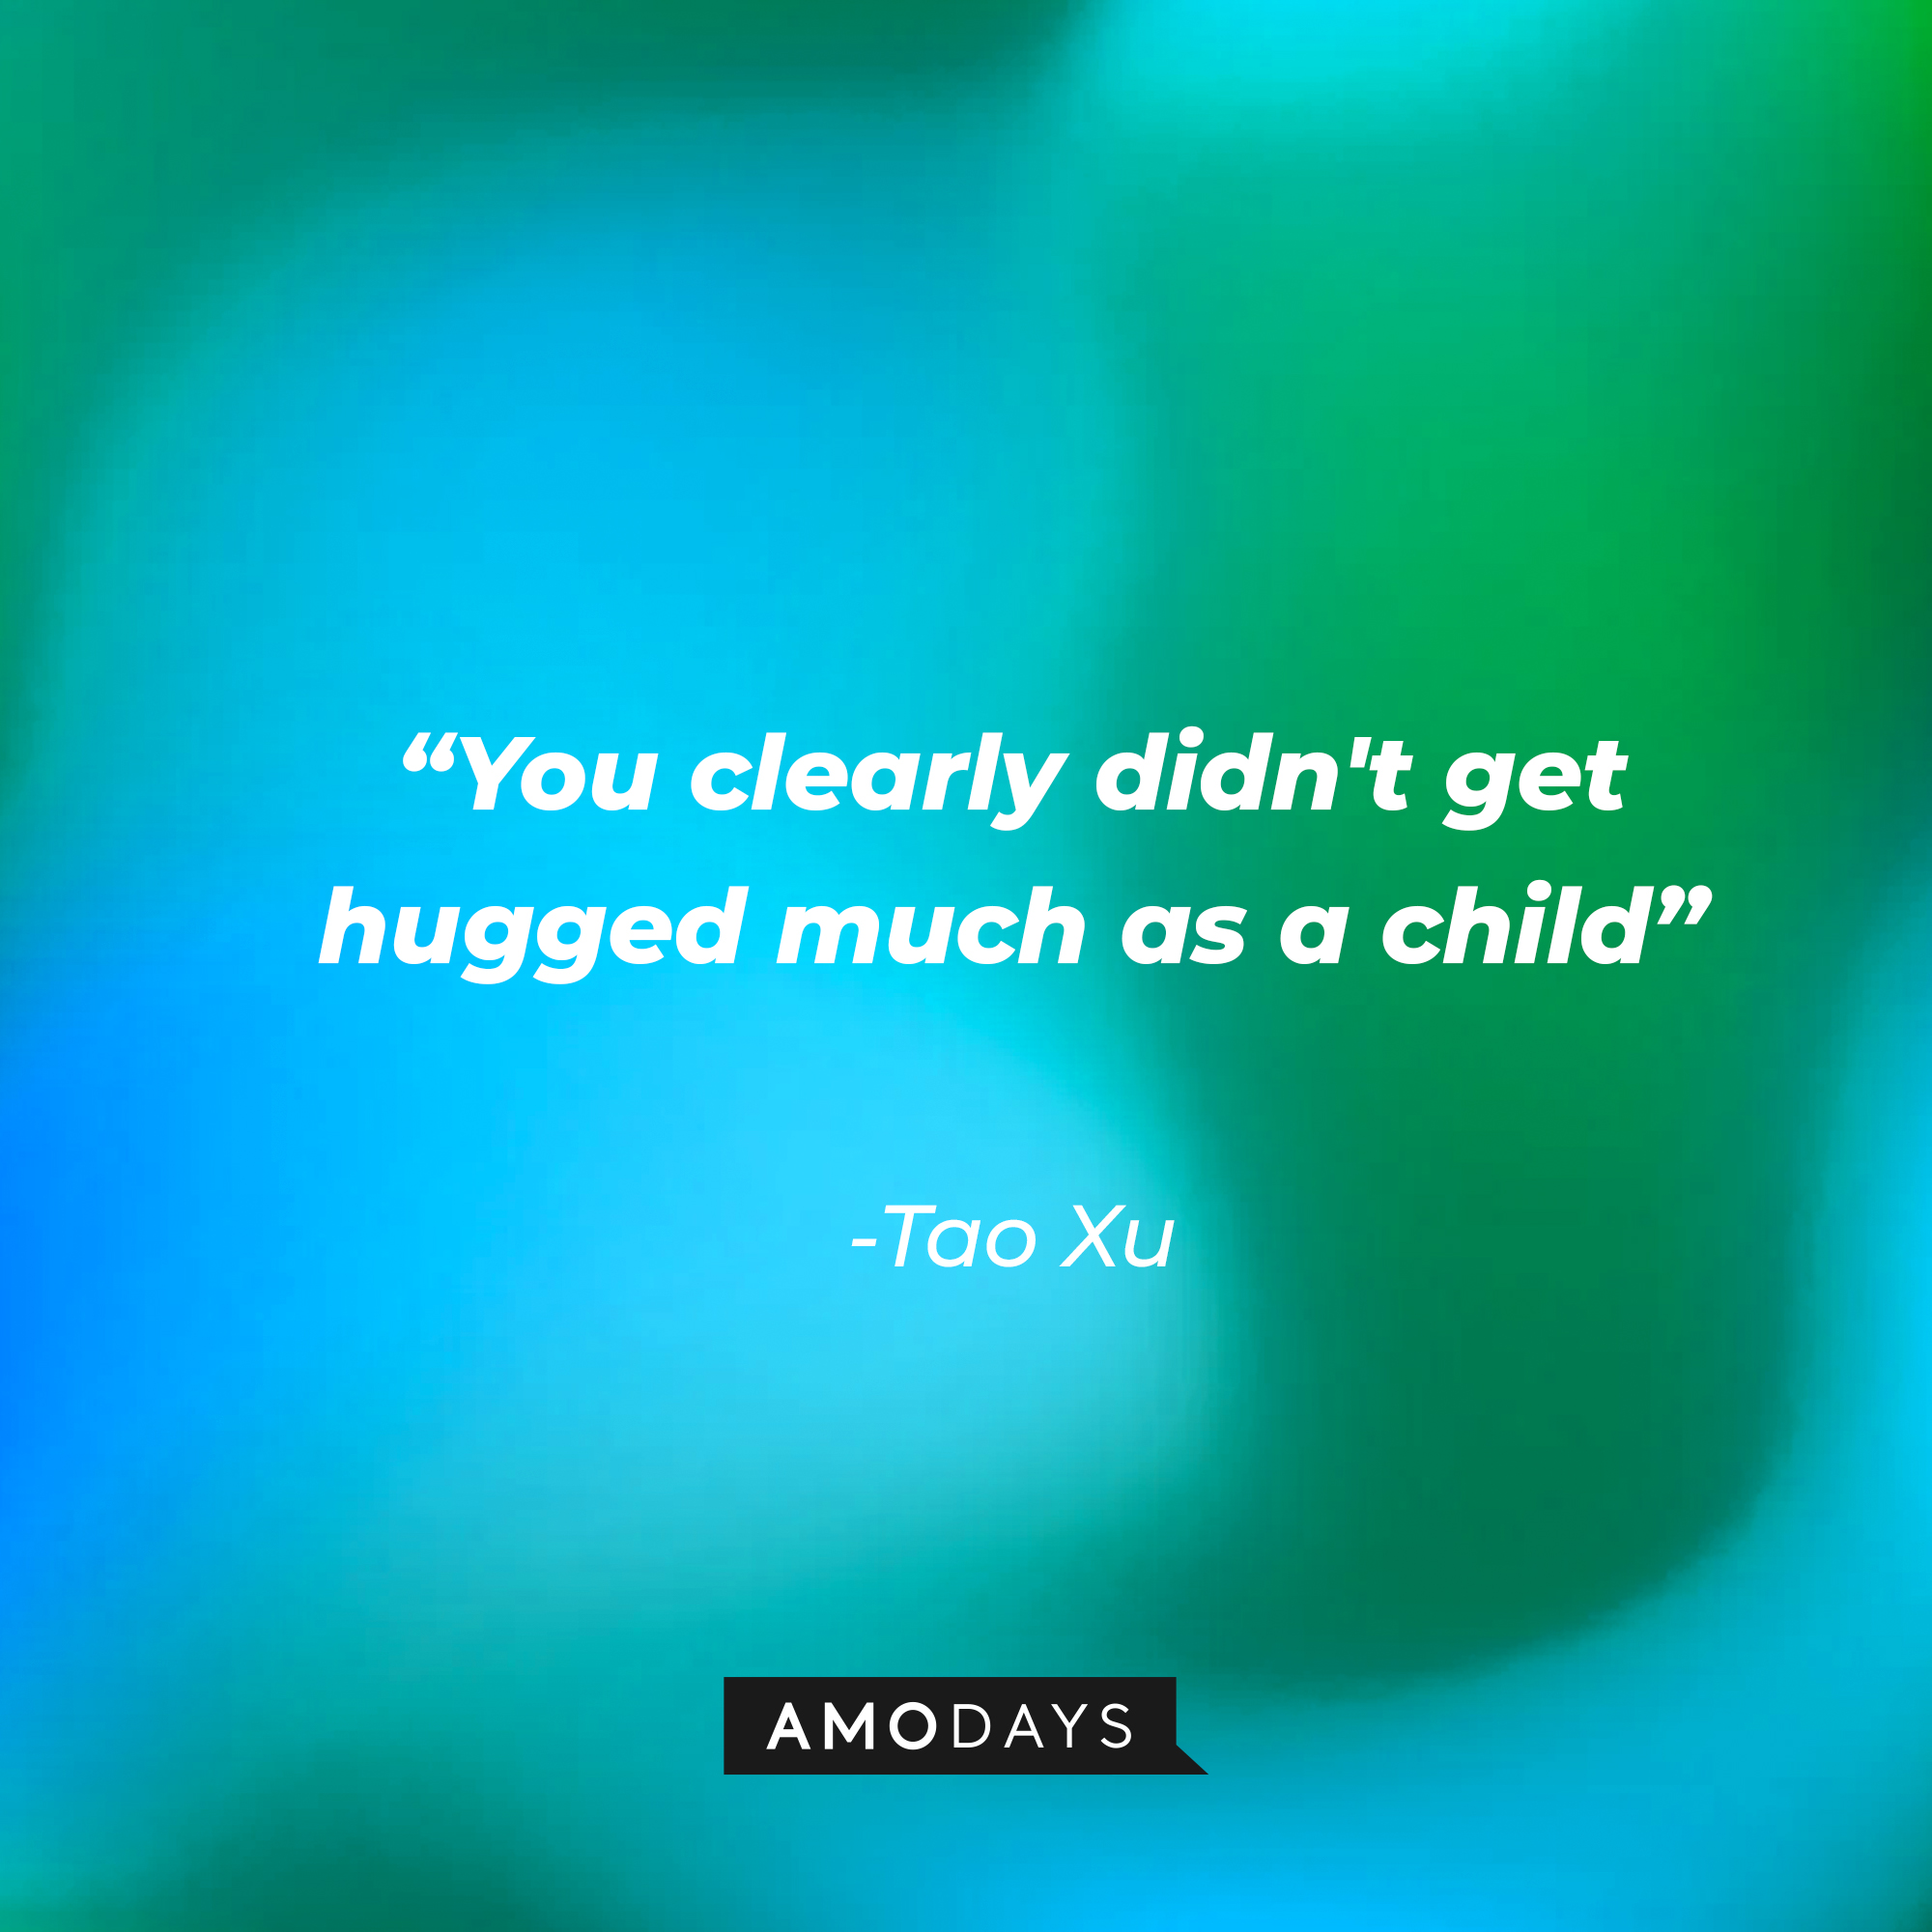 Tao Xu’s quote: “You clearly didn't get hugged much as a child” | Source: AmoDays